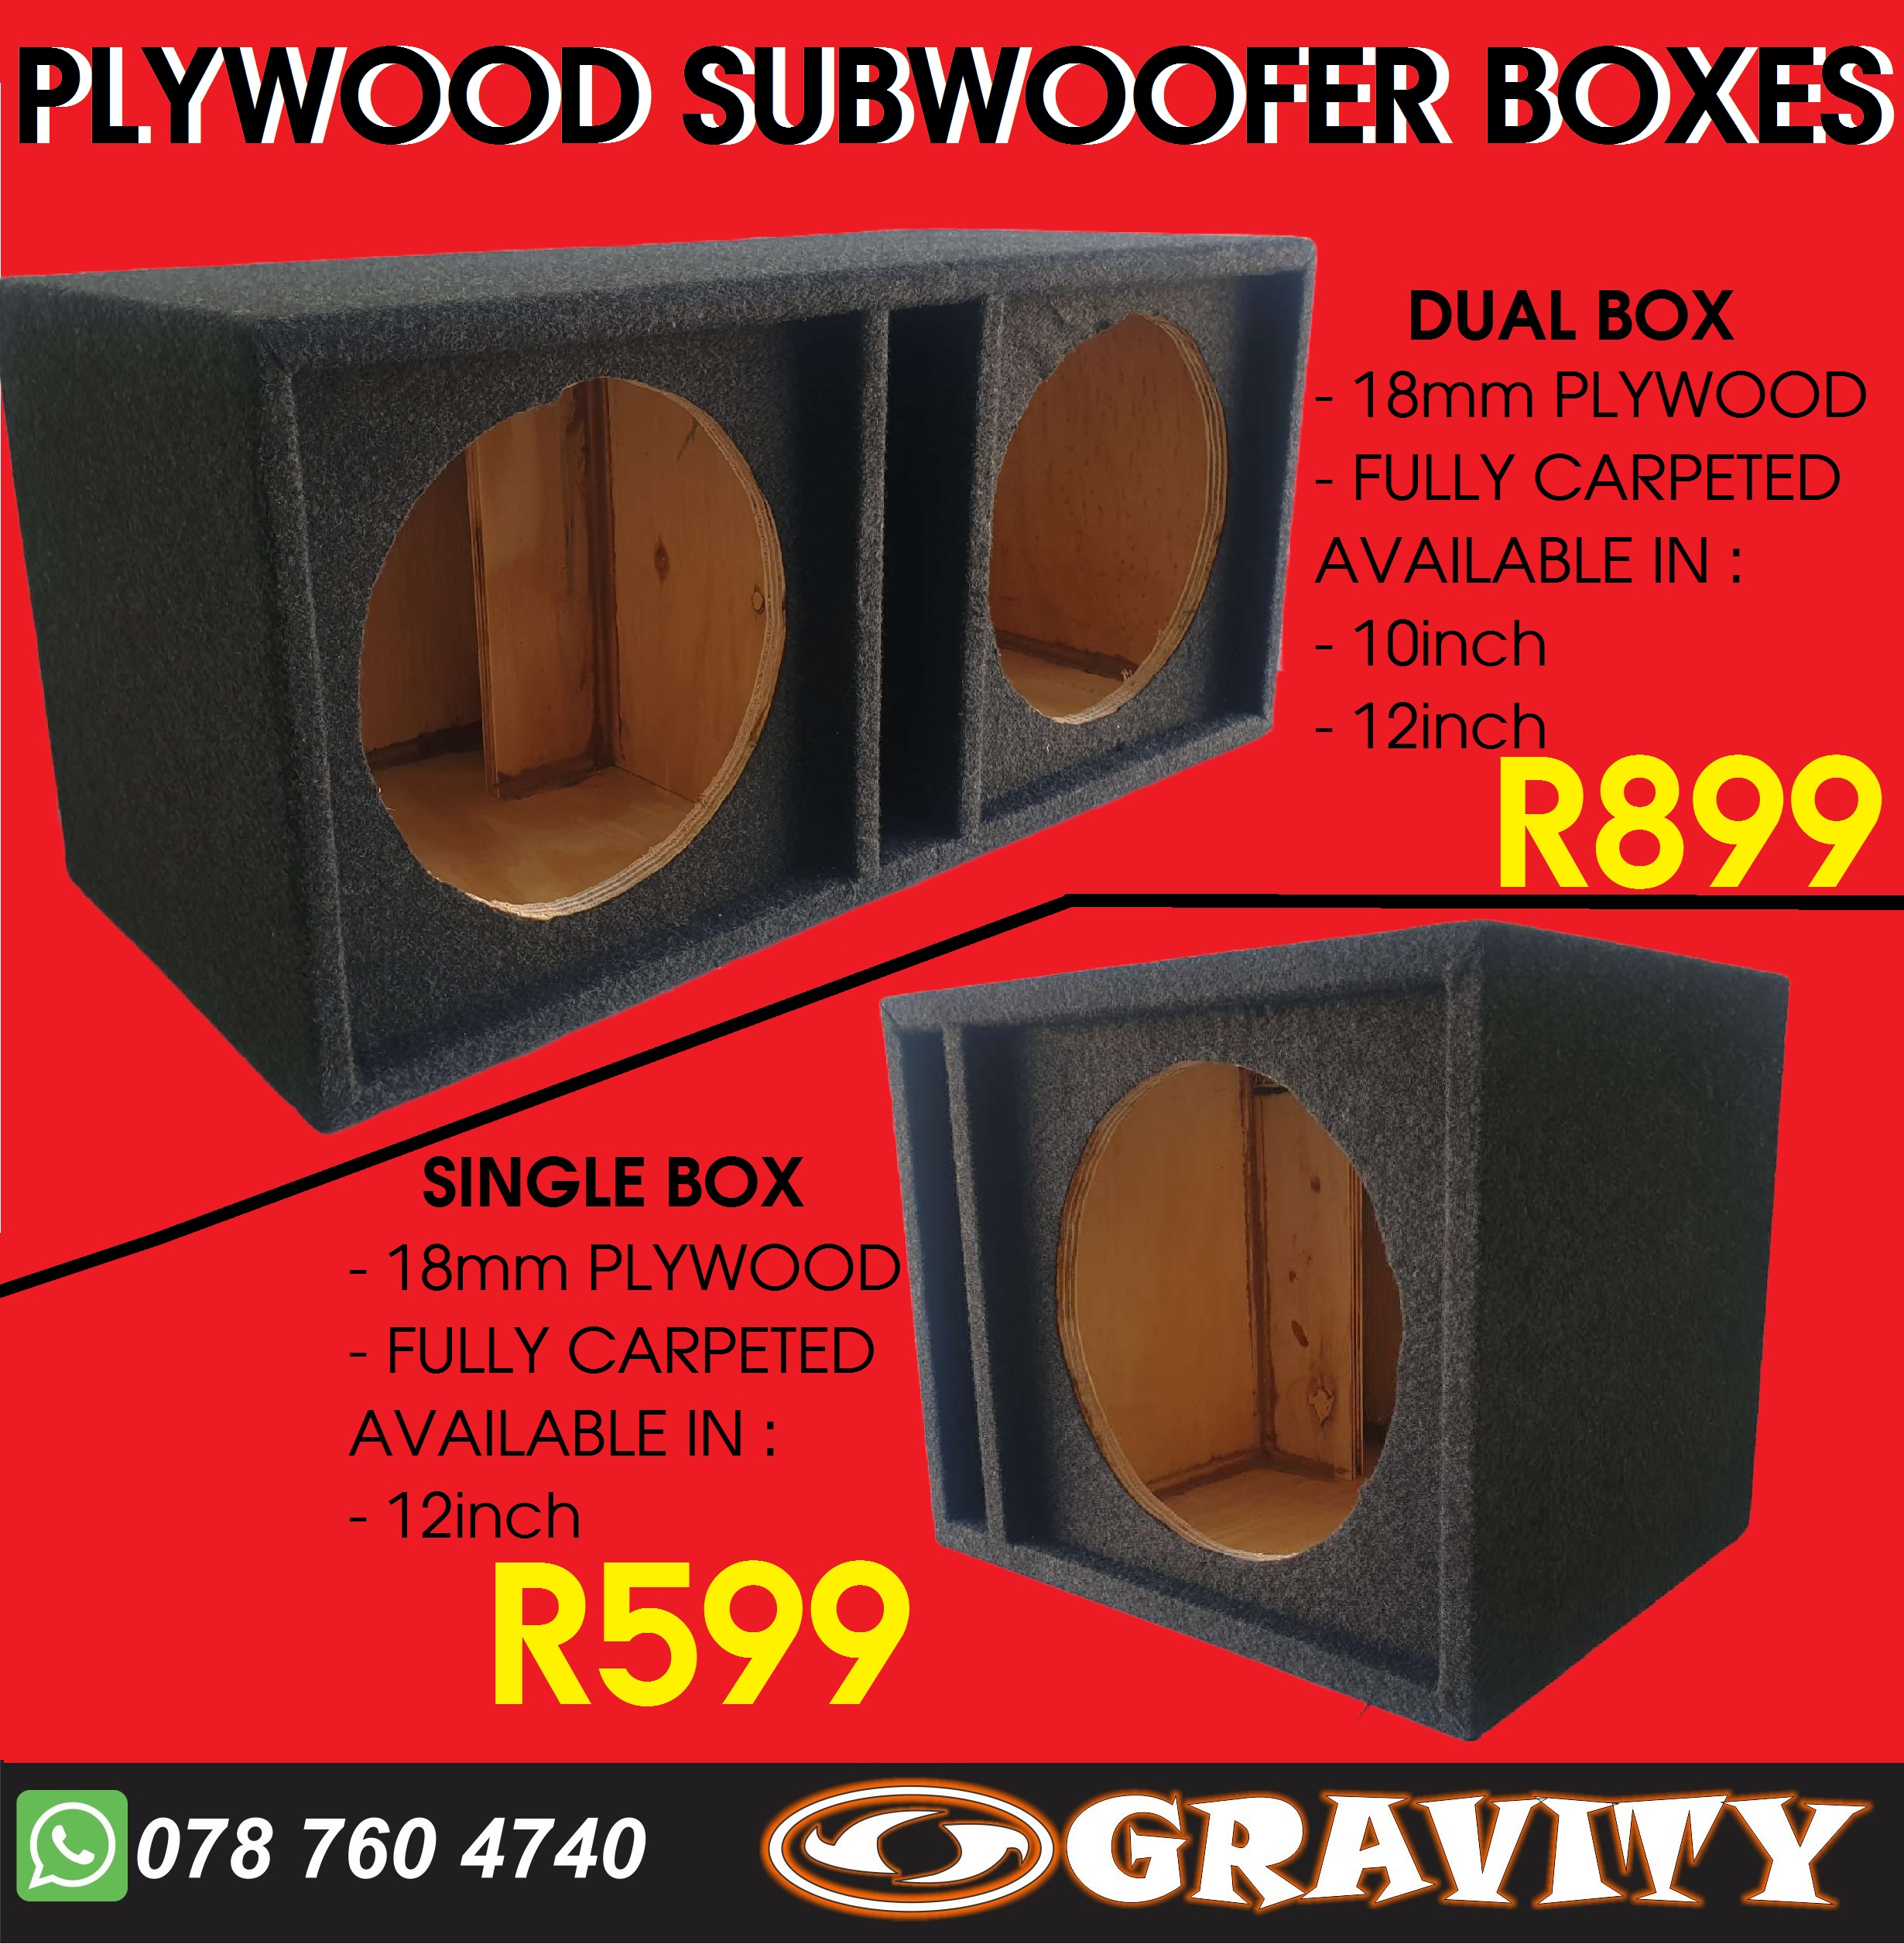 competition sub box , ply wood sub box , slot port sub box , car audio combo , car audio equipment , sony , pioneer ,jvc , kicker , targa , xtc , jbl . starsound  | car audio durban | car audio fitment durban | dj sound durban | disco dj pa equipment durban | disco dj lighting durban | dj mixer durban | dj power amp durban | tv box durban | air mouse durban | behringer durban | gravity sound and lighting warehouse durban | dj smoke achine durban | dj smoke fluid durban | disco dj lighting durban | disco dj led lighting durban | disco dj lazer lighting durban | car amps durban | car decks durban | car bluetooth decks durban | car van double dins durban | car subs durban | starsound grey cones subwoofers durban | Car accessories durban | disco dj party combos durban | J EQUIPMENT | DISCO DJ LIGHTING | DJ/PA COMBO PACKAGES | MULITIMEDIA | MOBILE DISCO-DJ FOR HIRE  SOUND EQUIPMENT HIRE | PROJECTOR AND SCREEN FOR HIRE | ELECTRONIC REPAIR CENTRE  GHD HAIR IRON REPIARS-CLOUD NINE | PUBLIC ADDRESS SYSTEMS | PA DESK MIXERS  SANITIZER FOGGING MACHINES | POWER AMPLIFER | CROSSOVE 